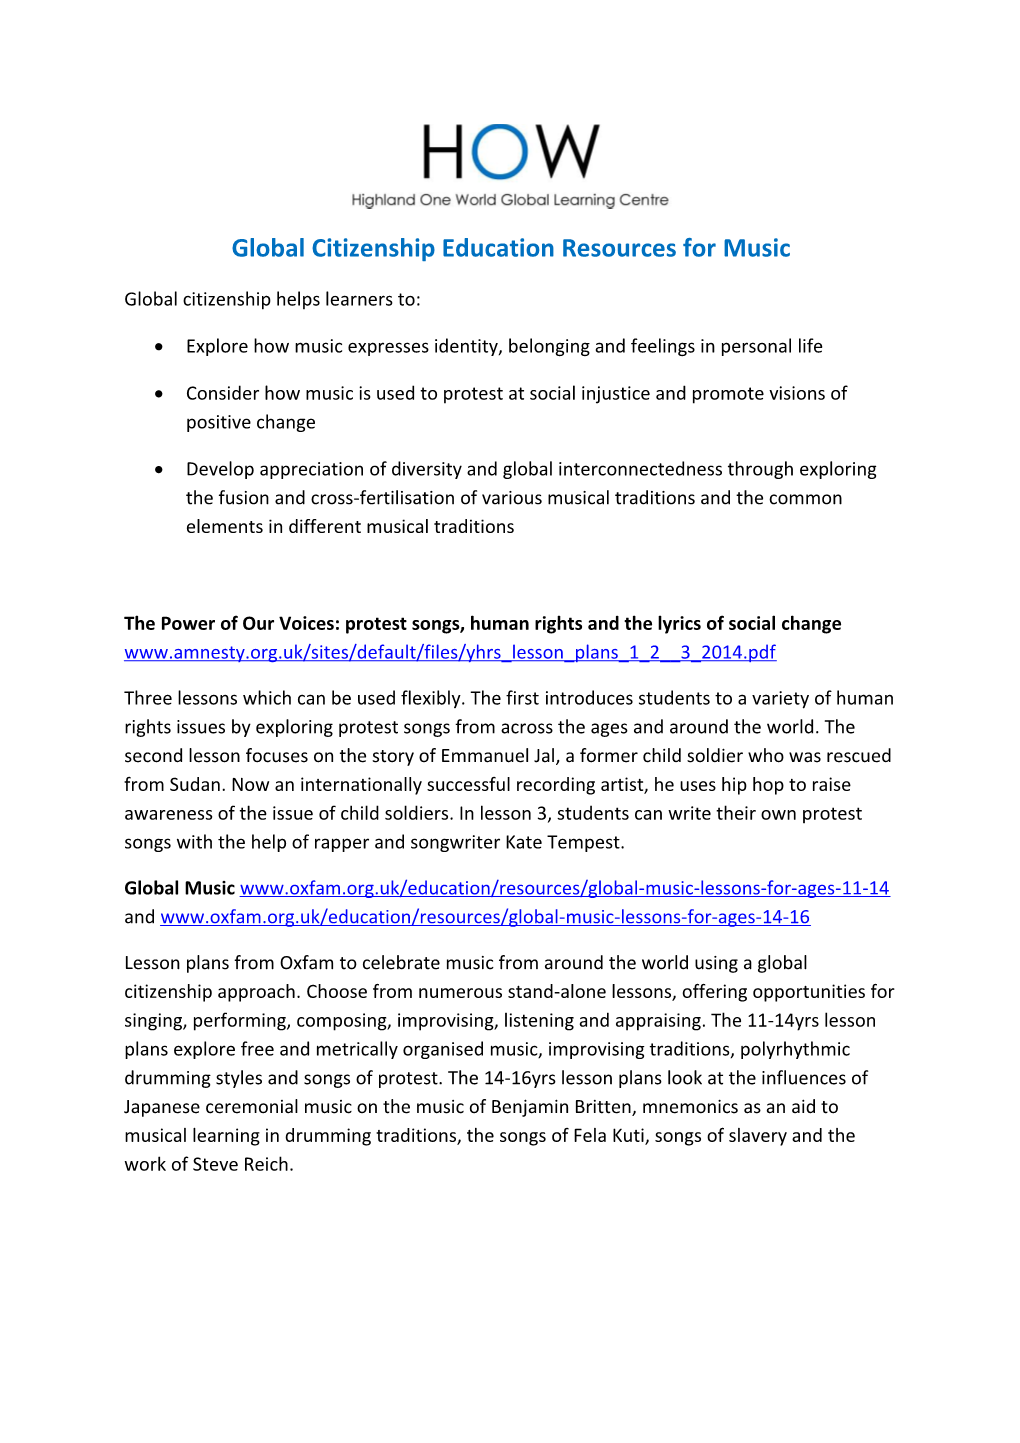 Global Citizenship Education Resources for Music